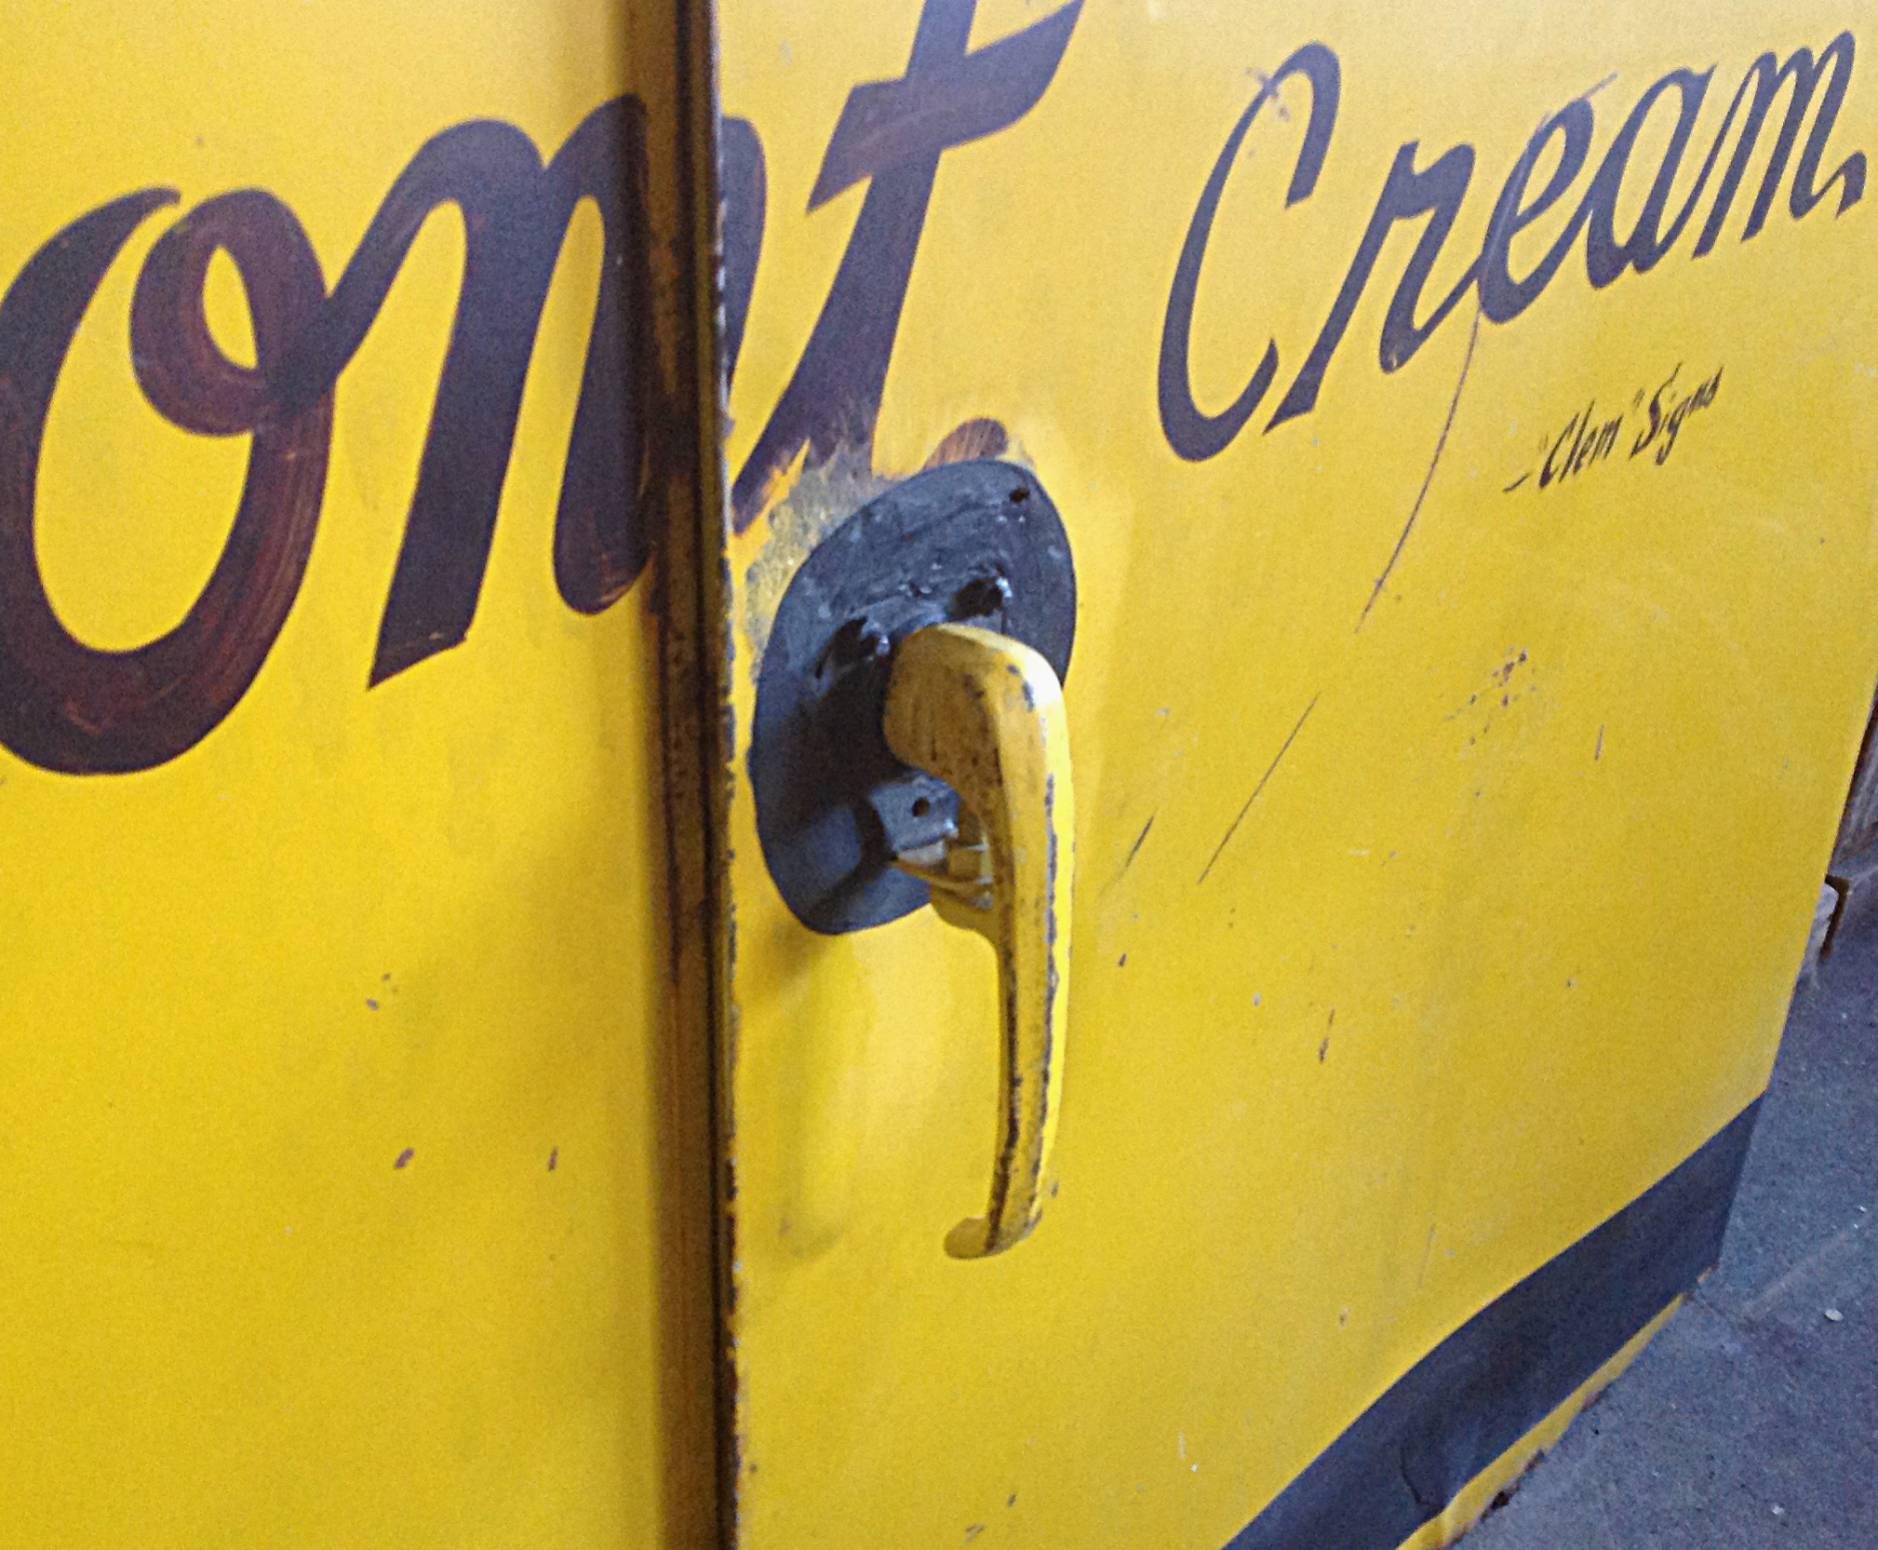 Spectacular pair of steel doors with hand lettered advertising. Malcolm T. Aikens was a Dairy man from Saratoga Springs, New York. Wonderful graphic lettering in black on vibrant yellow background, mid-20th century. Overall great condition some rust